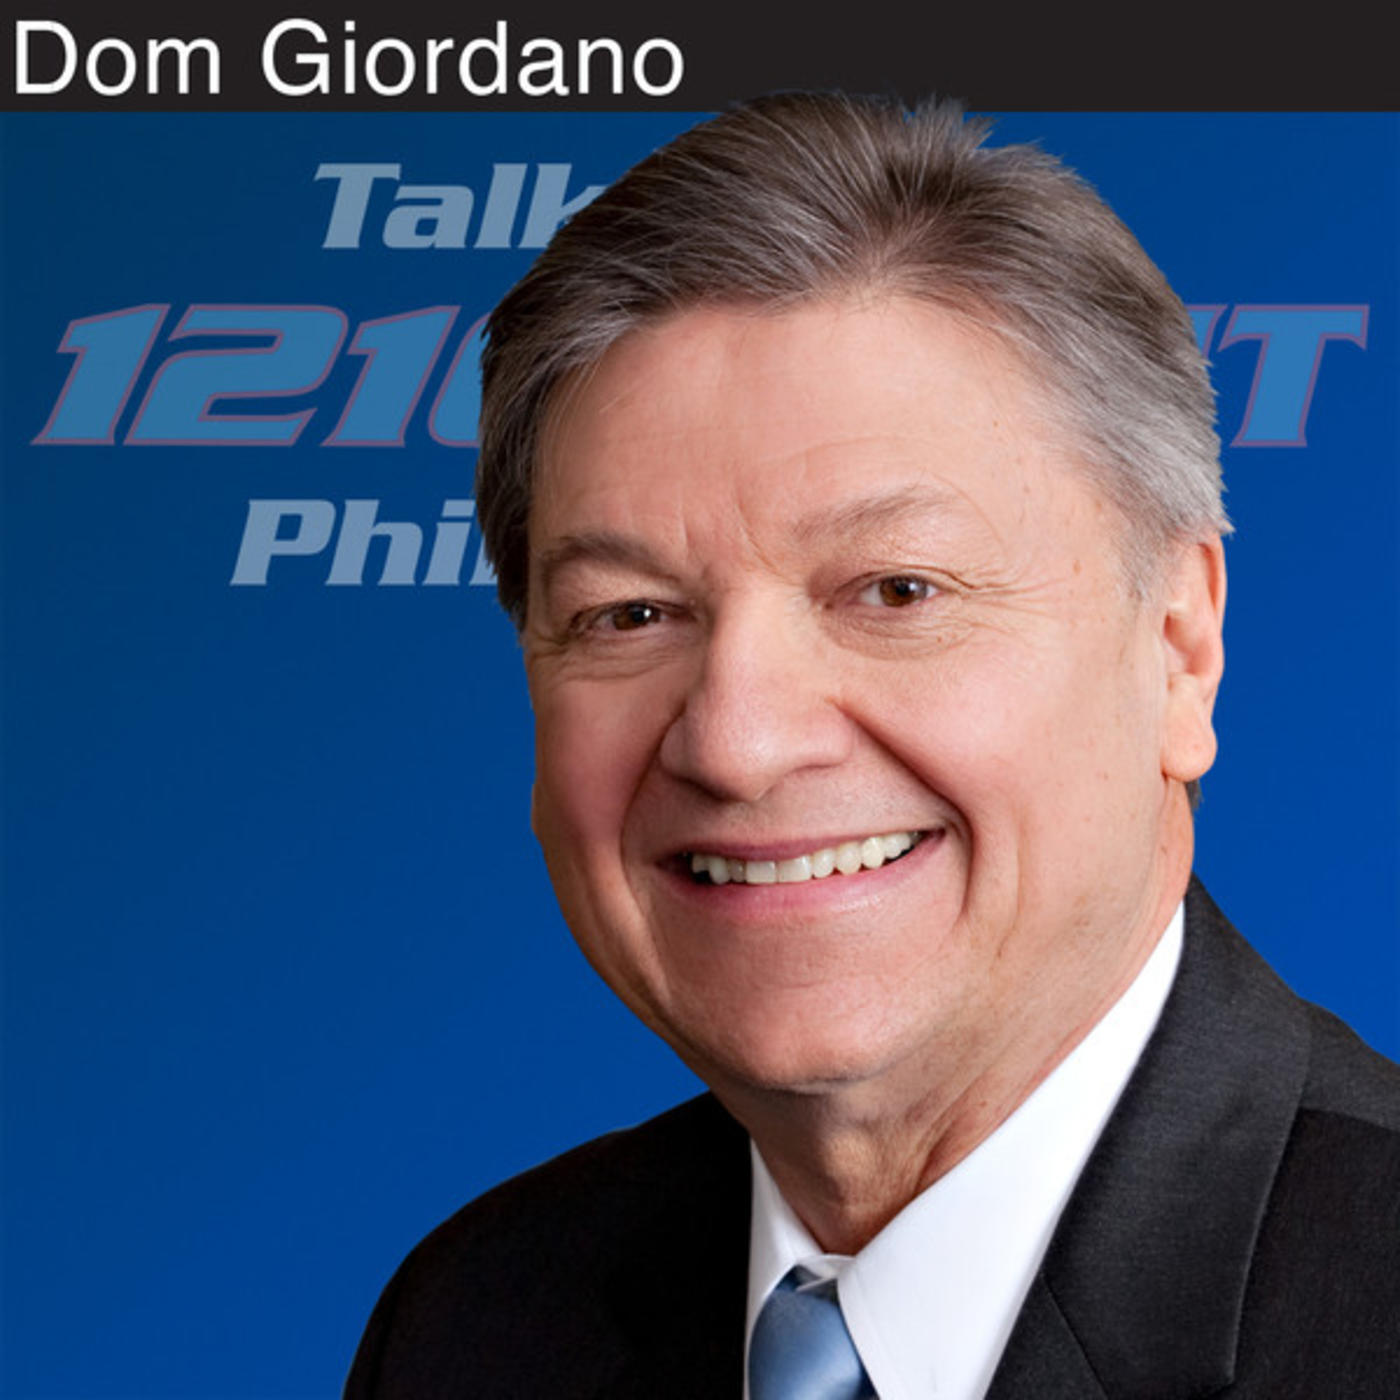 Dom Giordano LIVE from Farley Service Plaza | Hour 3